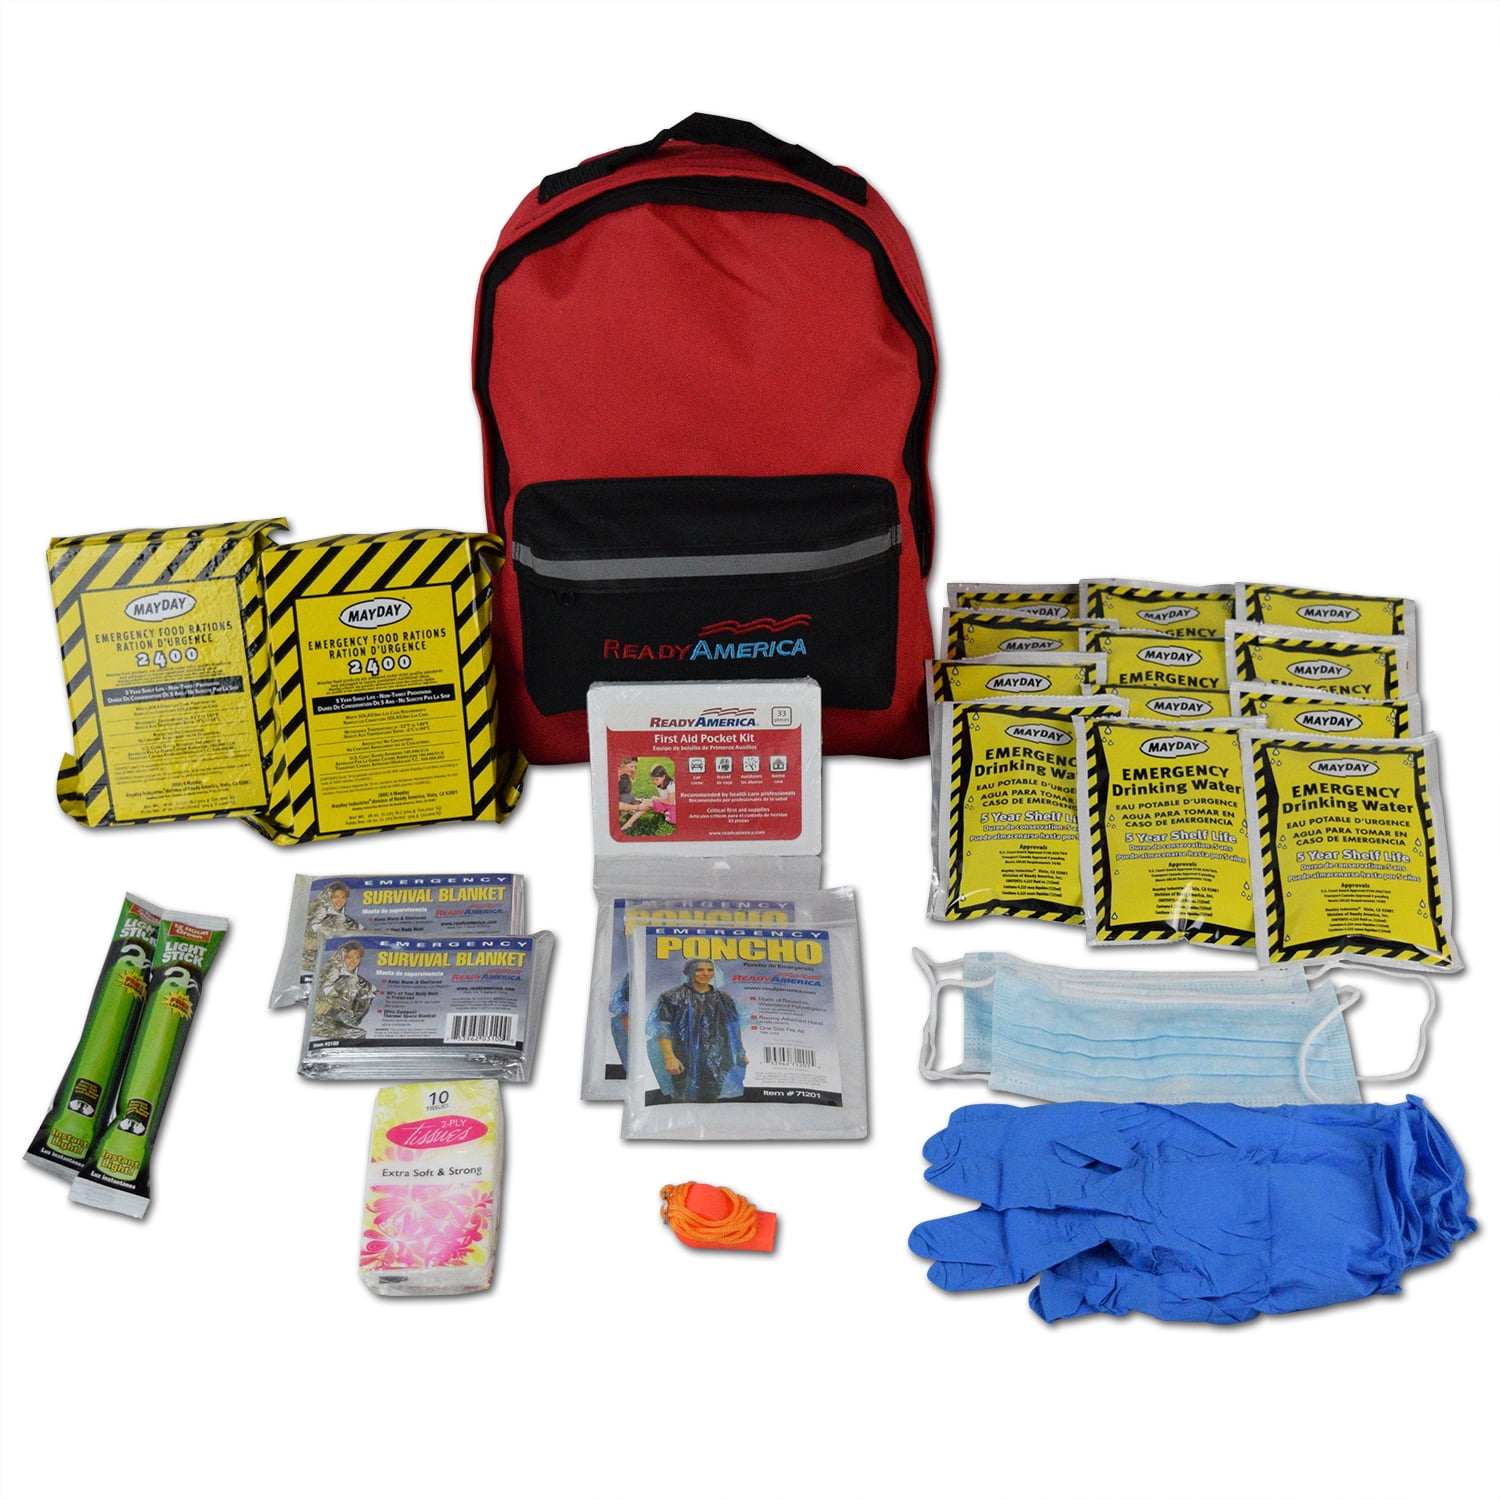 Ready America 70280 Emergency Kit 3-Day Backpack 2-Person Fivе Расk 